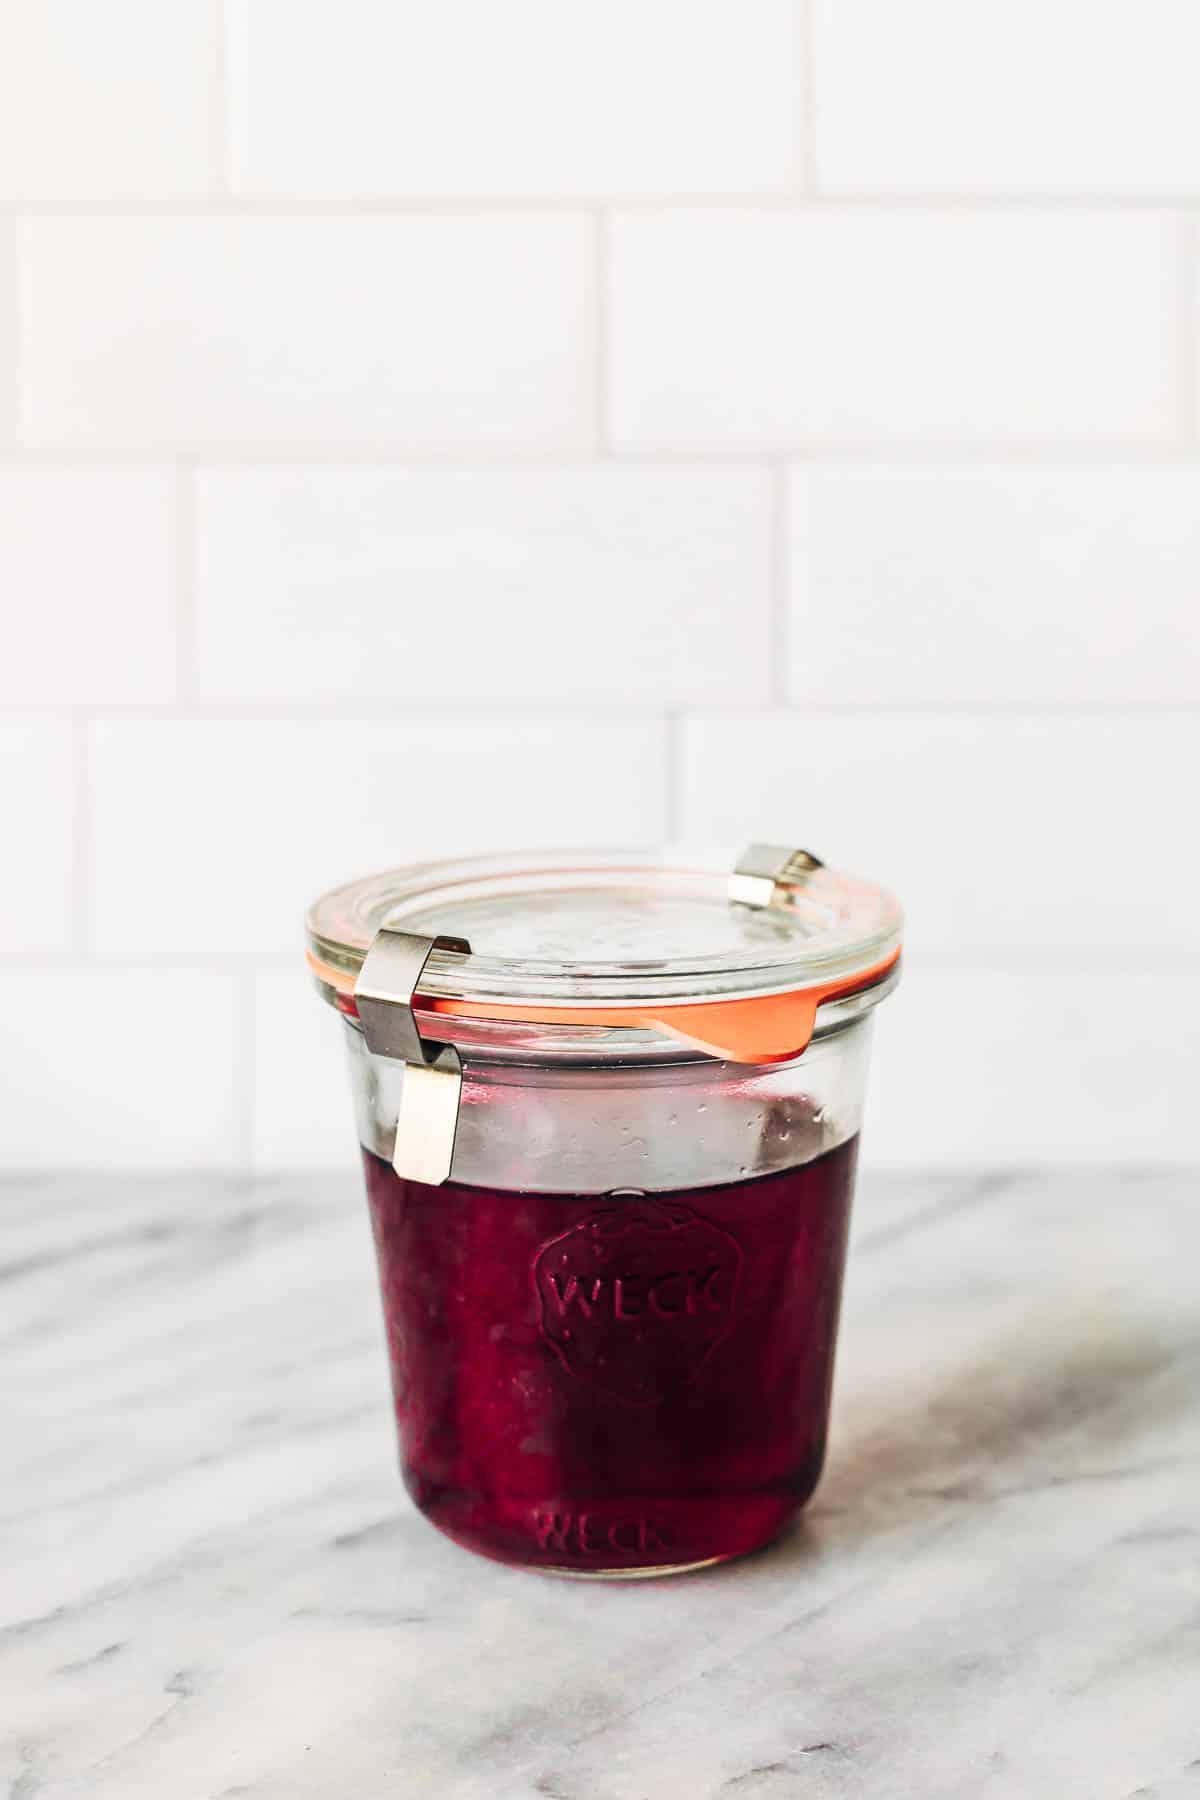 Hibiscus syrup in a small glass jar on a kitchen counter.